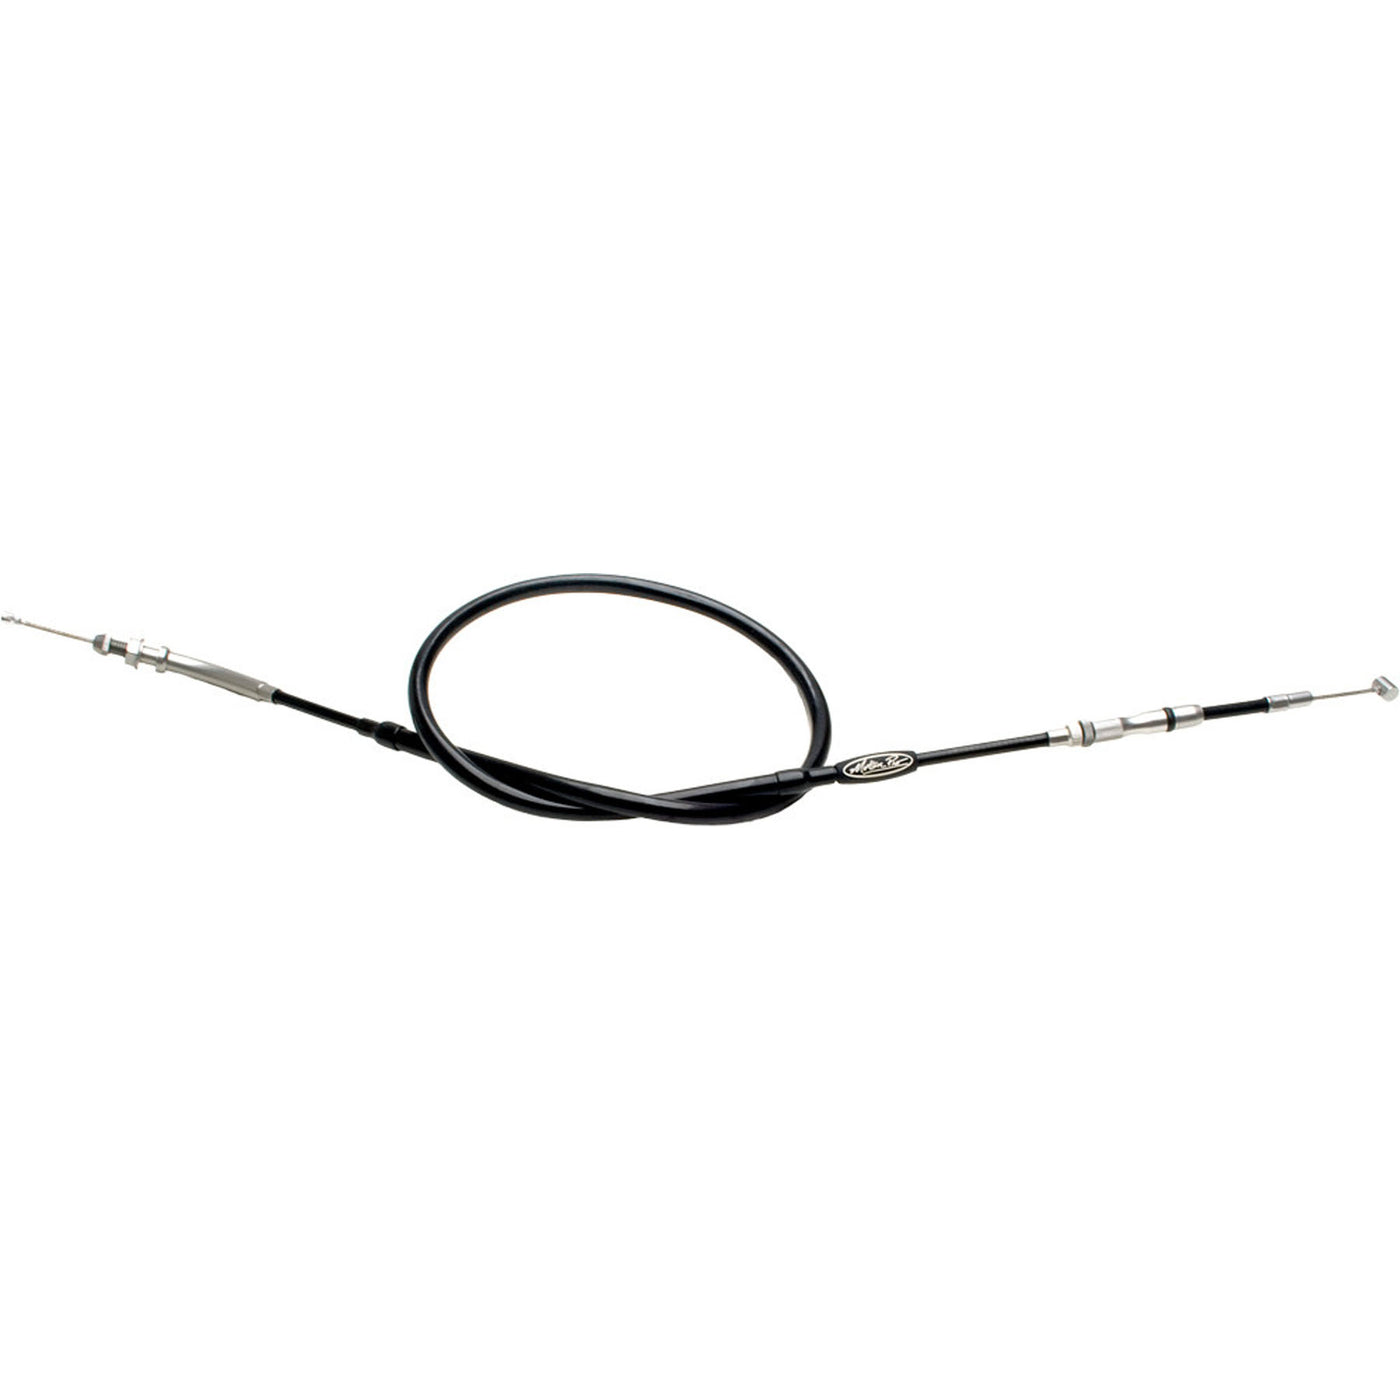 CABLE, T3 SLIDELIGHT, CLUTCH#_mpn404019